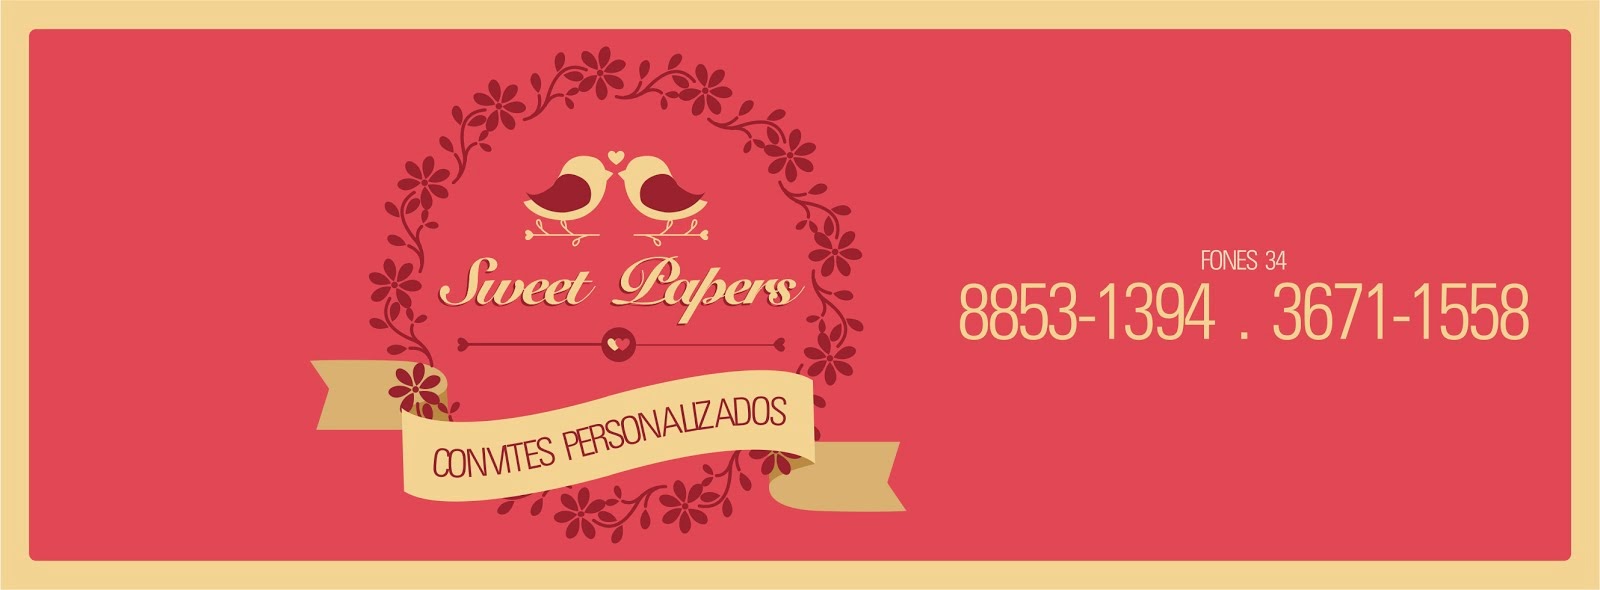 sweetpapers